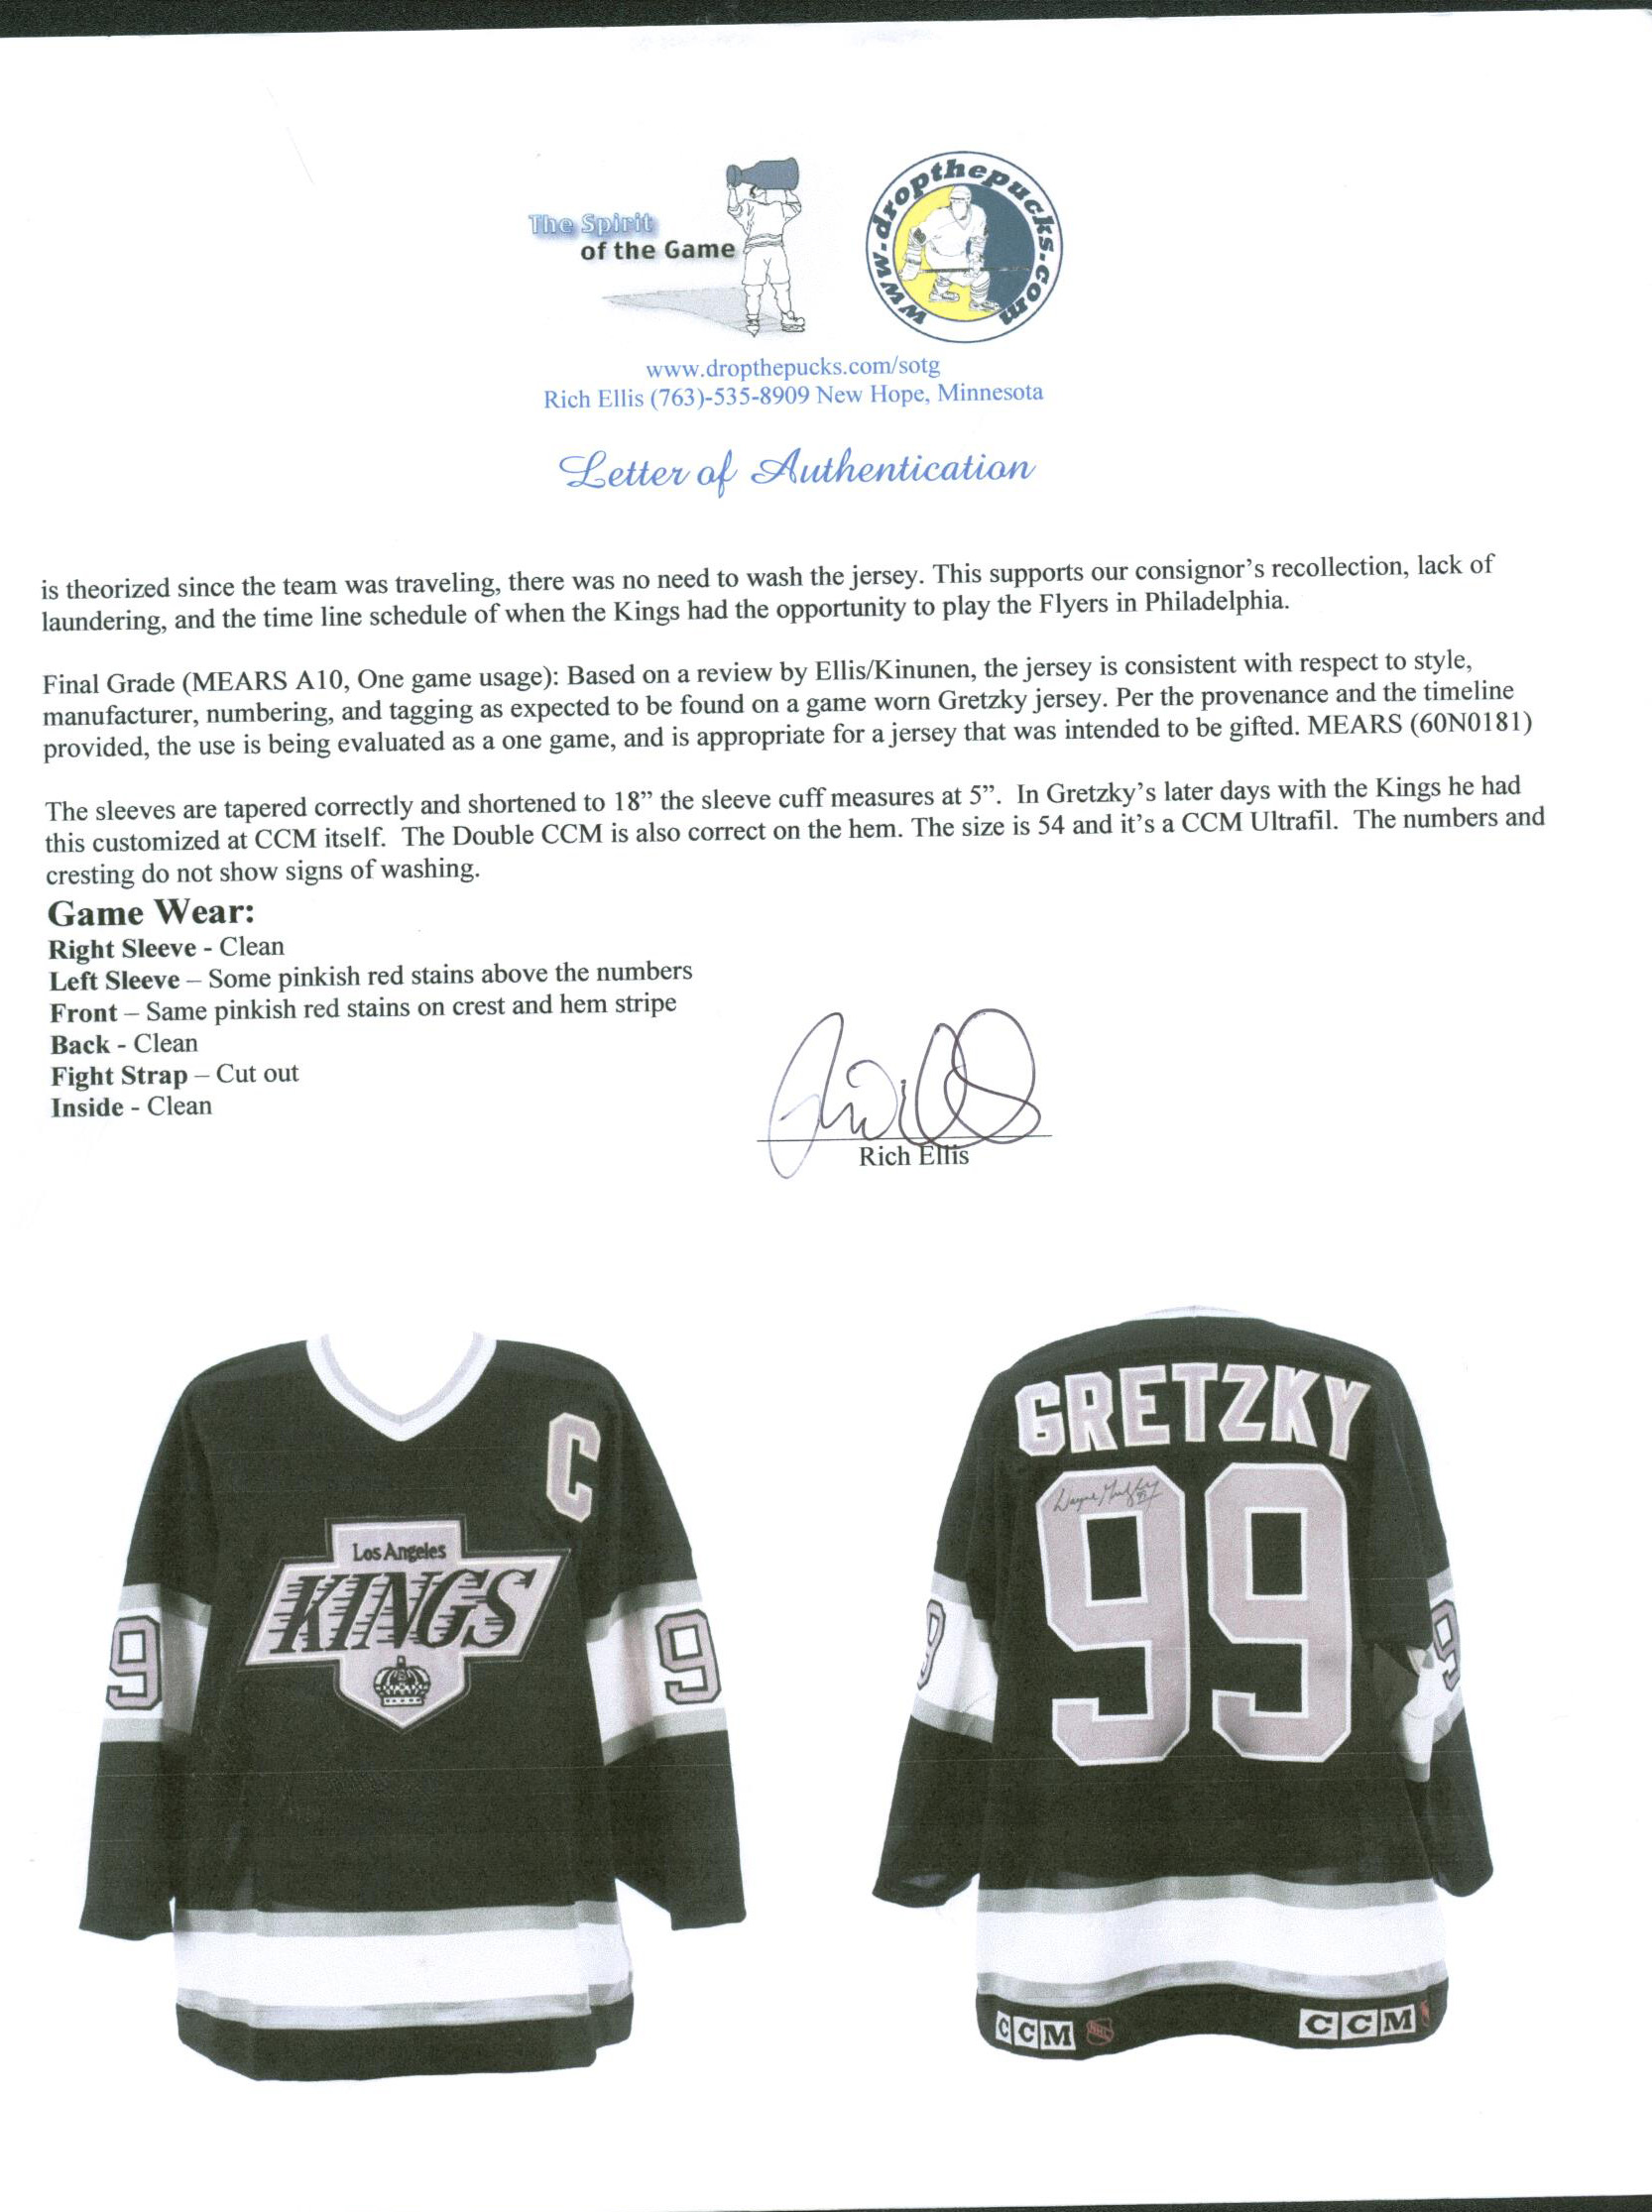 Sell or Auction Your Wayne Gretzky Game Worn Los Angeles Kings Jersey